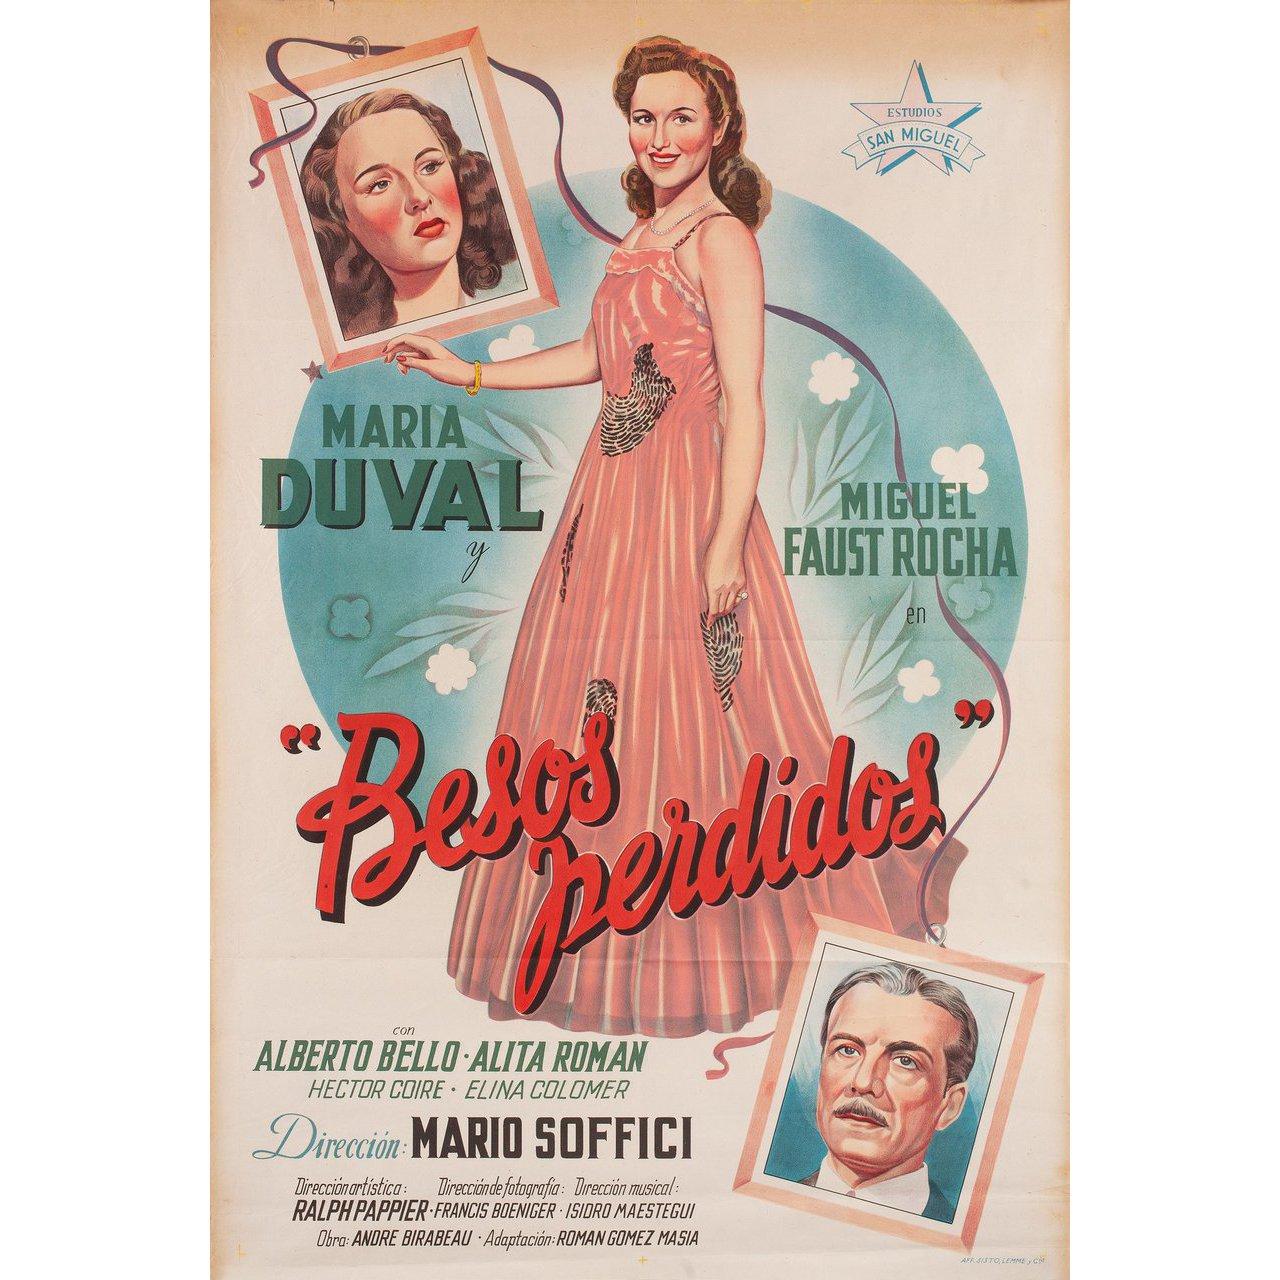 Original 1945 Argentine poster for the film Besos perdidos (Lost Kisses) directed by Mario Soffici with Alberto Bello / Roberto Bordoni / Jose Castro. Very Good condition, folded. Many original posters were issued folded or were subsequently folded.